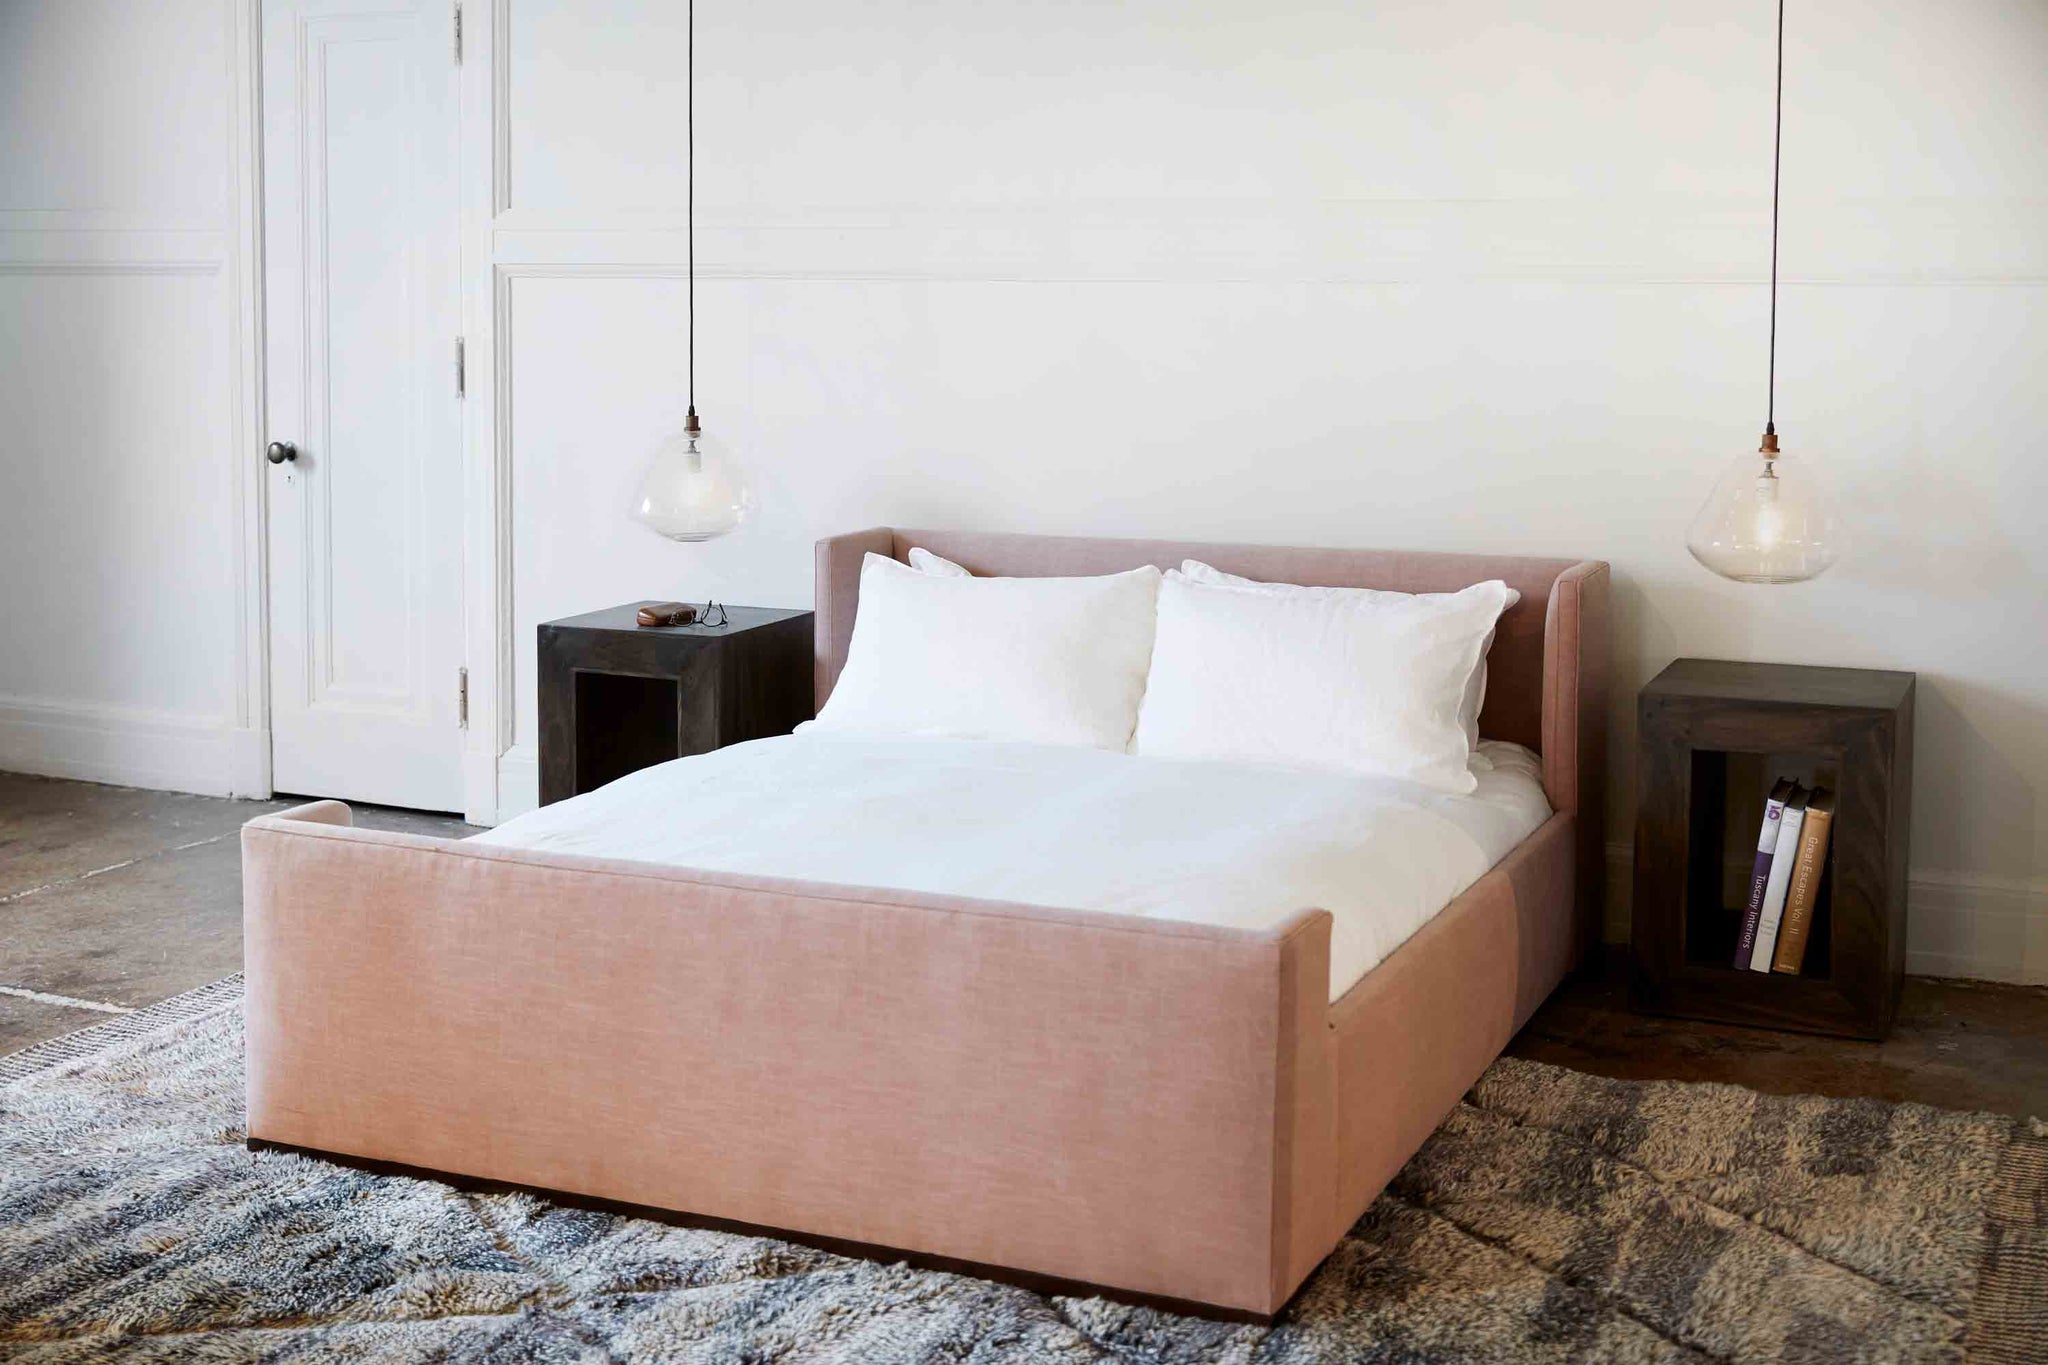  Laurel bed in Molino Blush next to two wood side tables. Underneath is a patterned rug. On top of the side tables are clear lamps that hang above. Photographed in Molino Blush. 